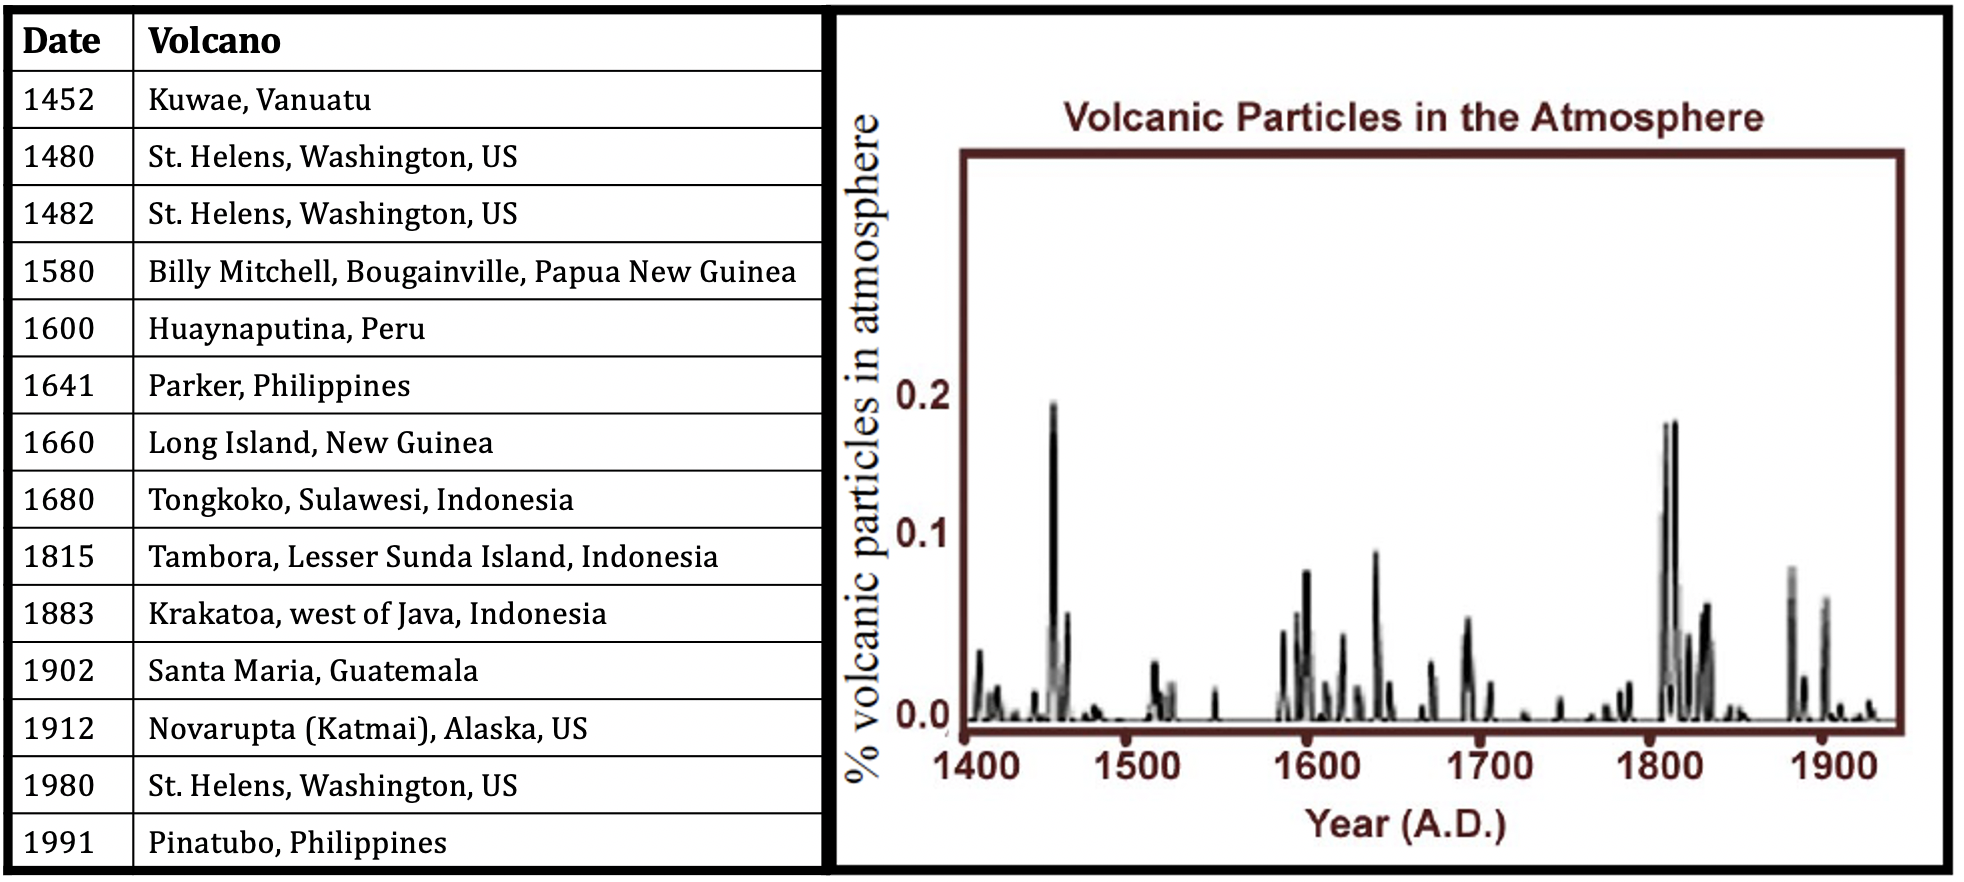 This is a graph showing that an increase in the number of particles in the atmosphere corresponds to the occurrence of volcanic eruptions between 1400 and 1900.